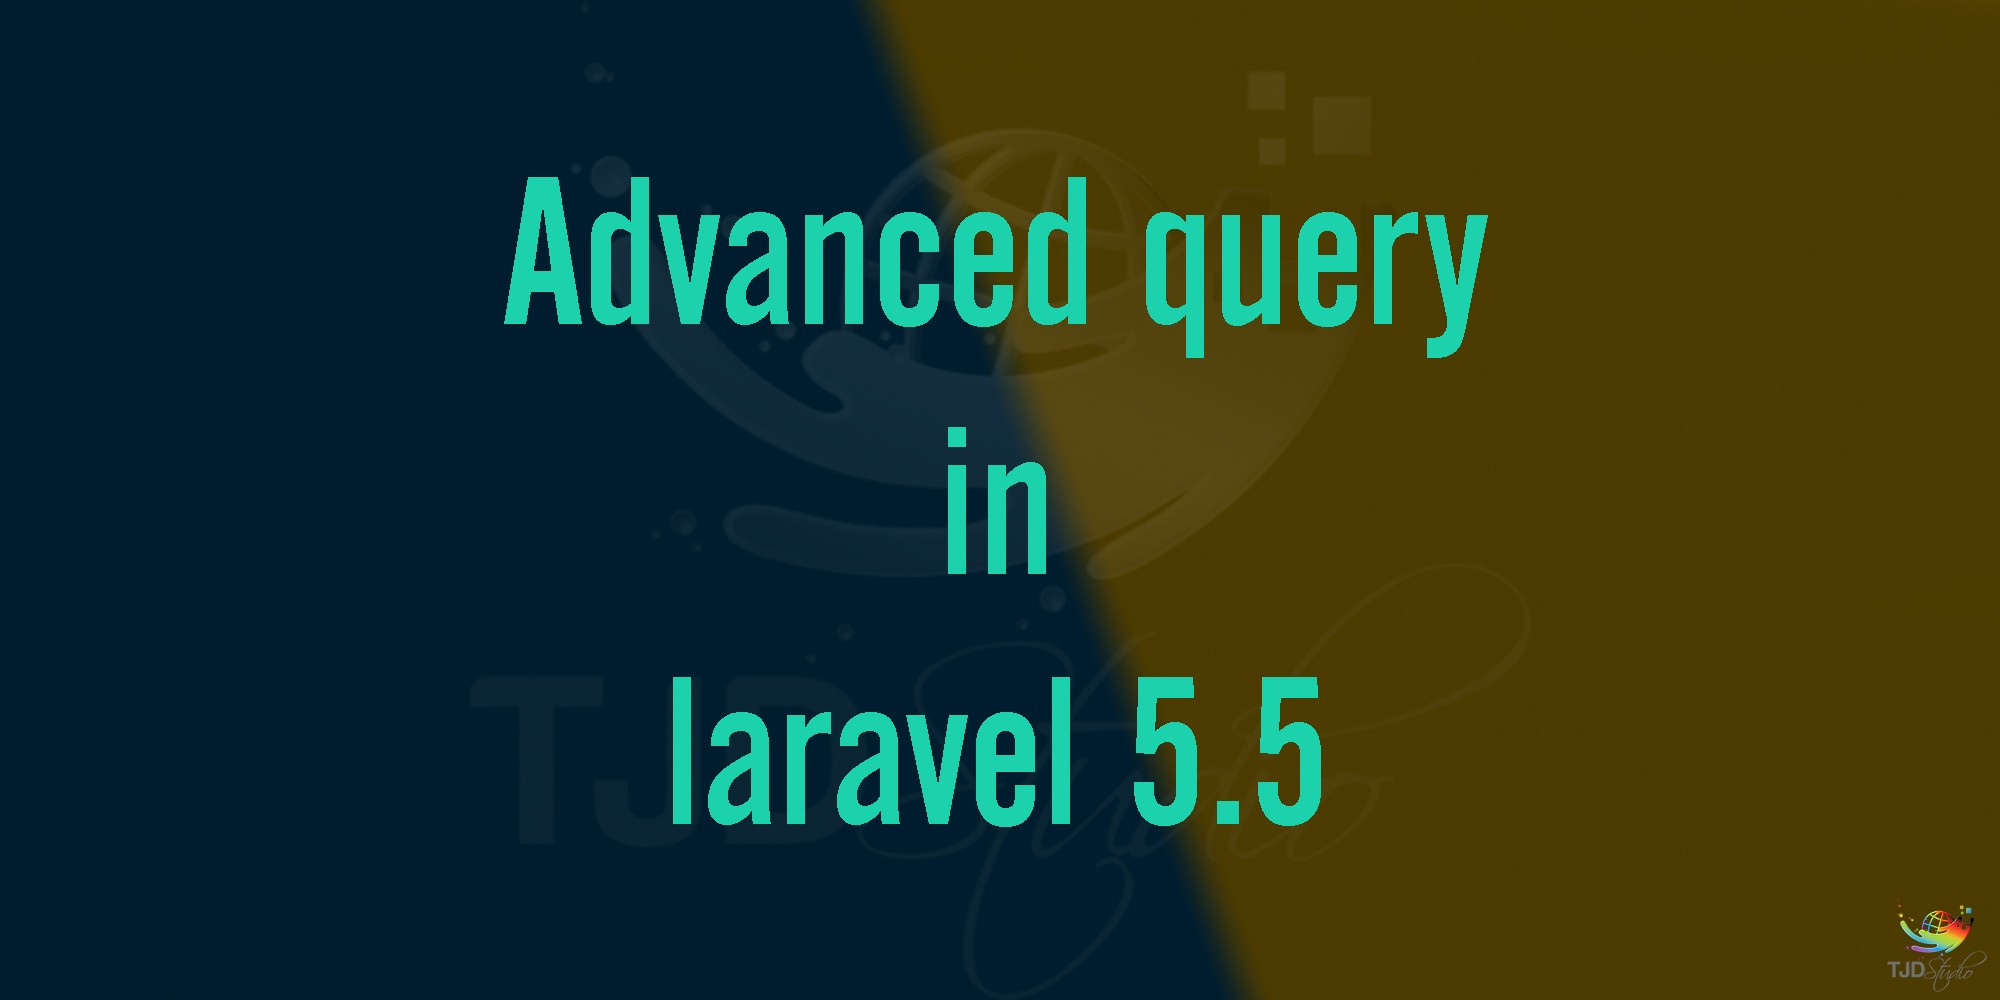 Advanced query in laravel 5.5